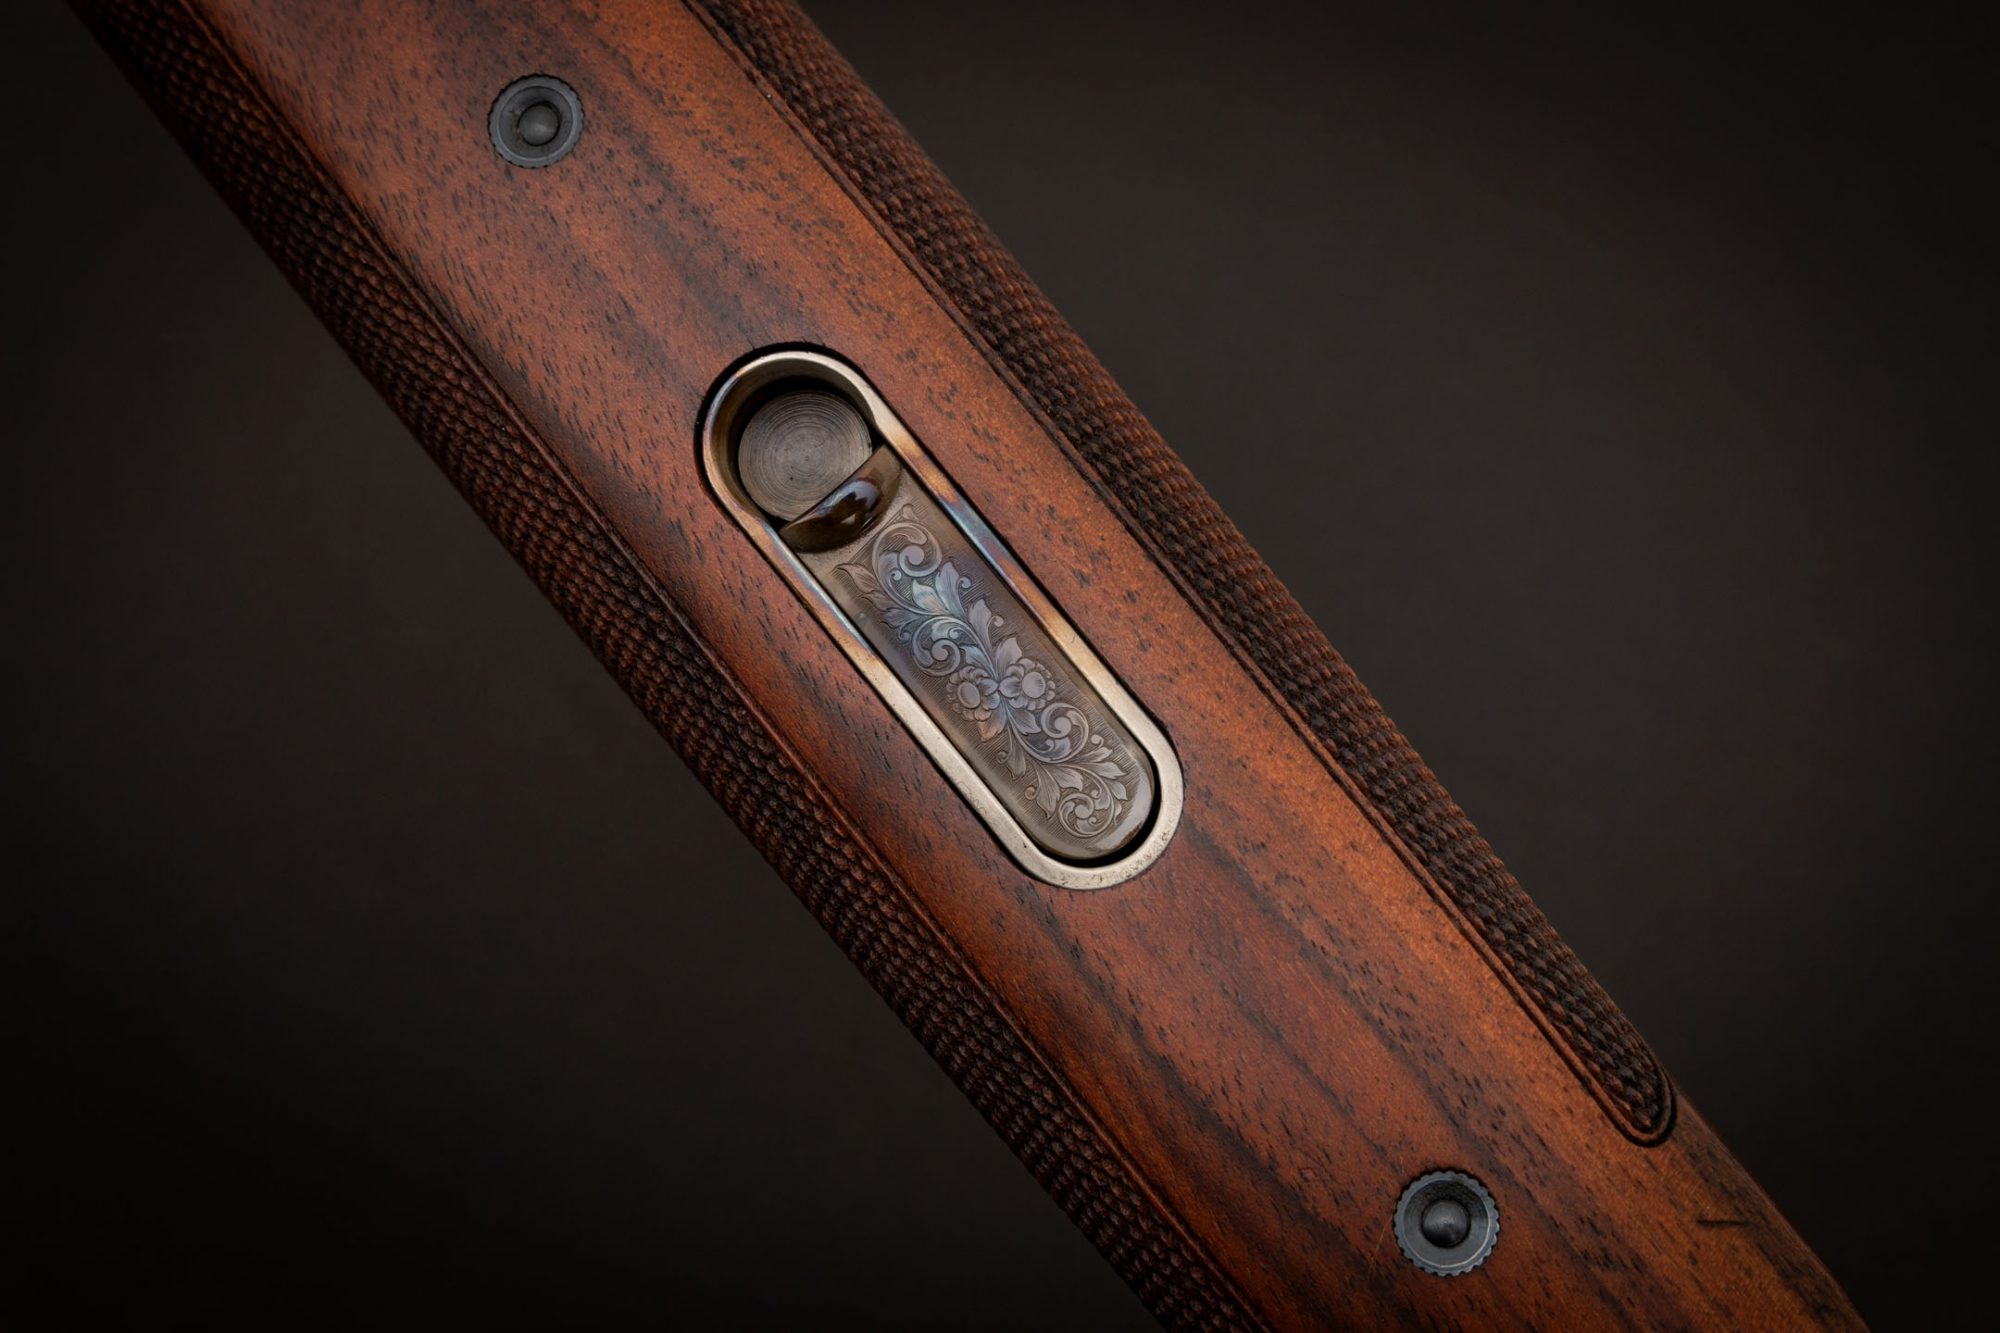 Phot of a Beretta 687 Silver Pigeon V for sale by Turnbull Restoration of Bloomfield, NY